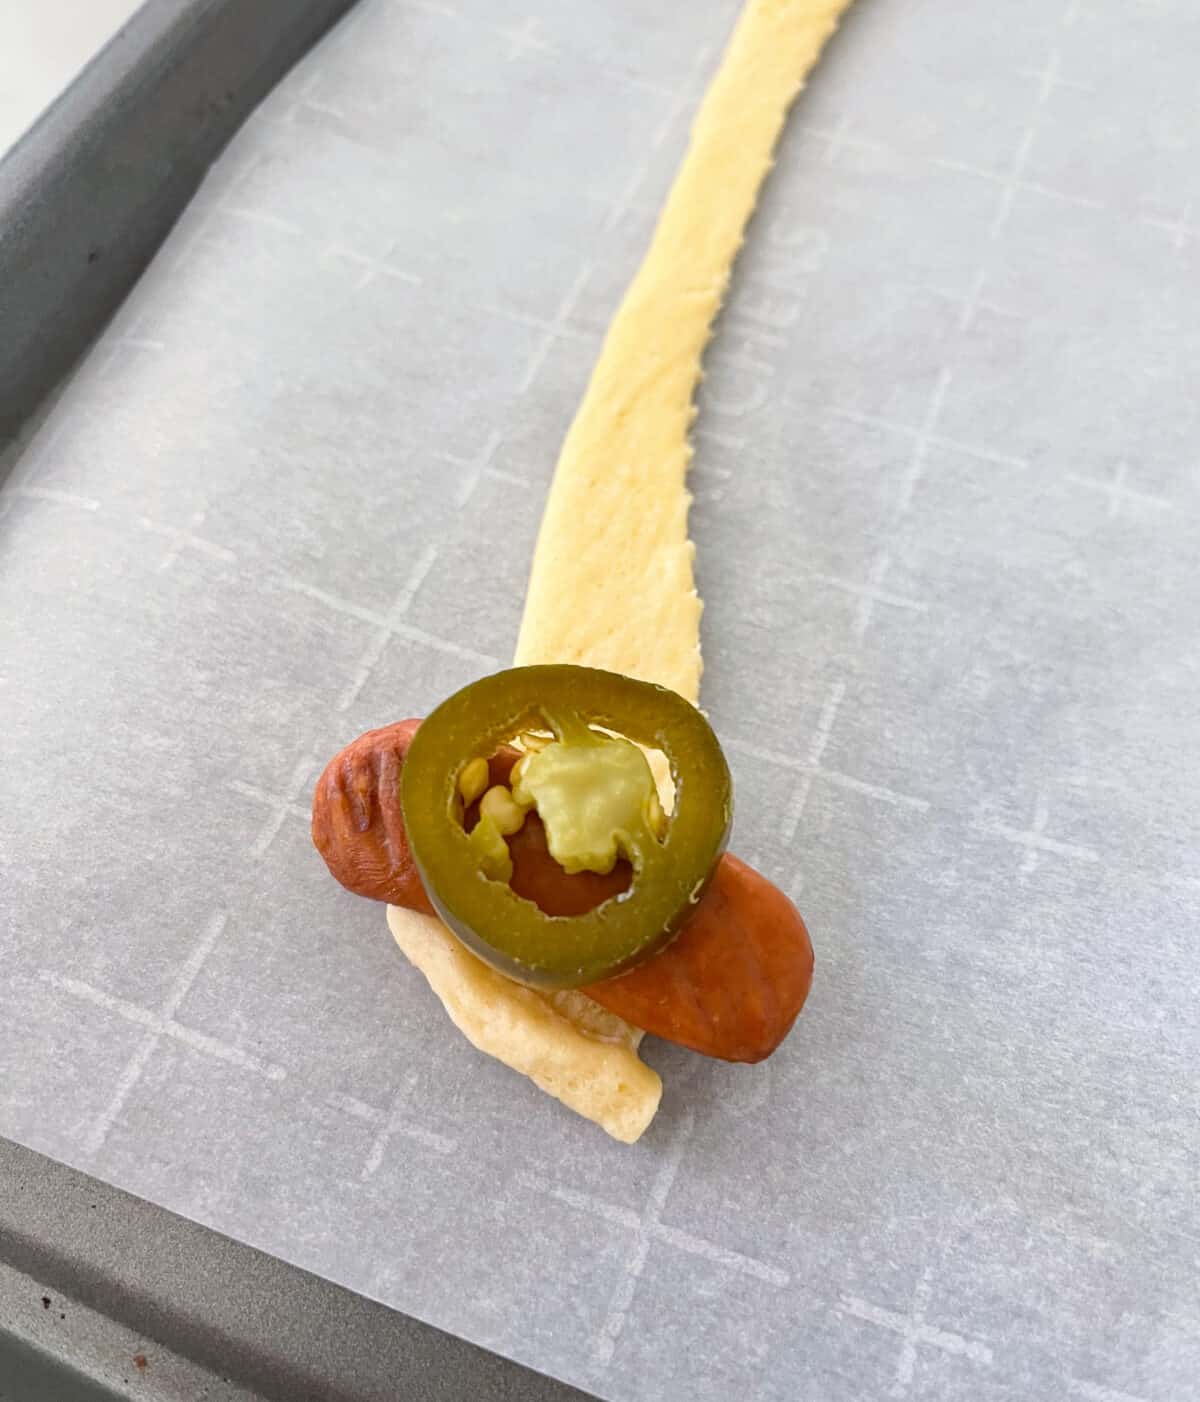 lil smokies and jalapeno placed on top of crescent roll.